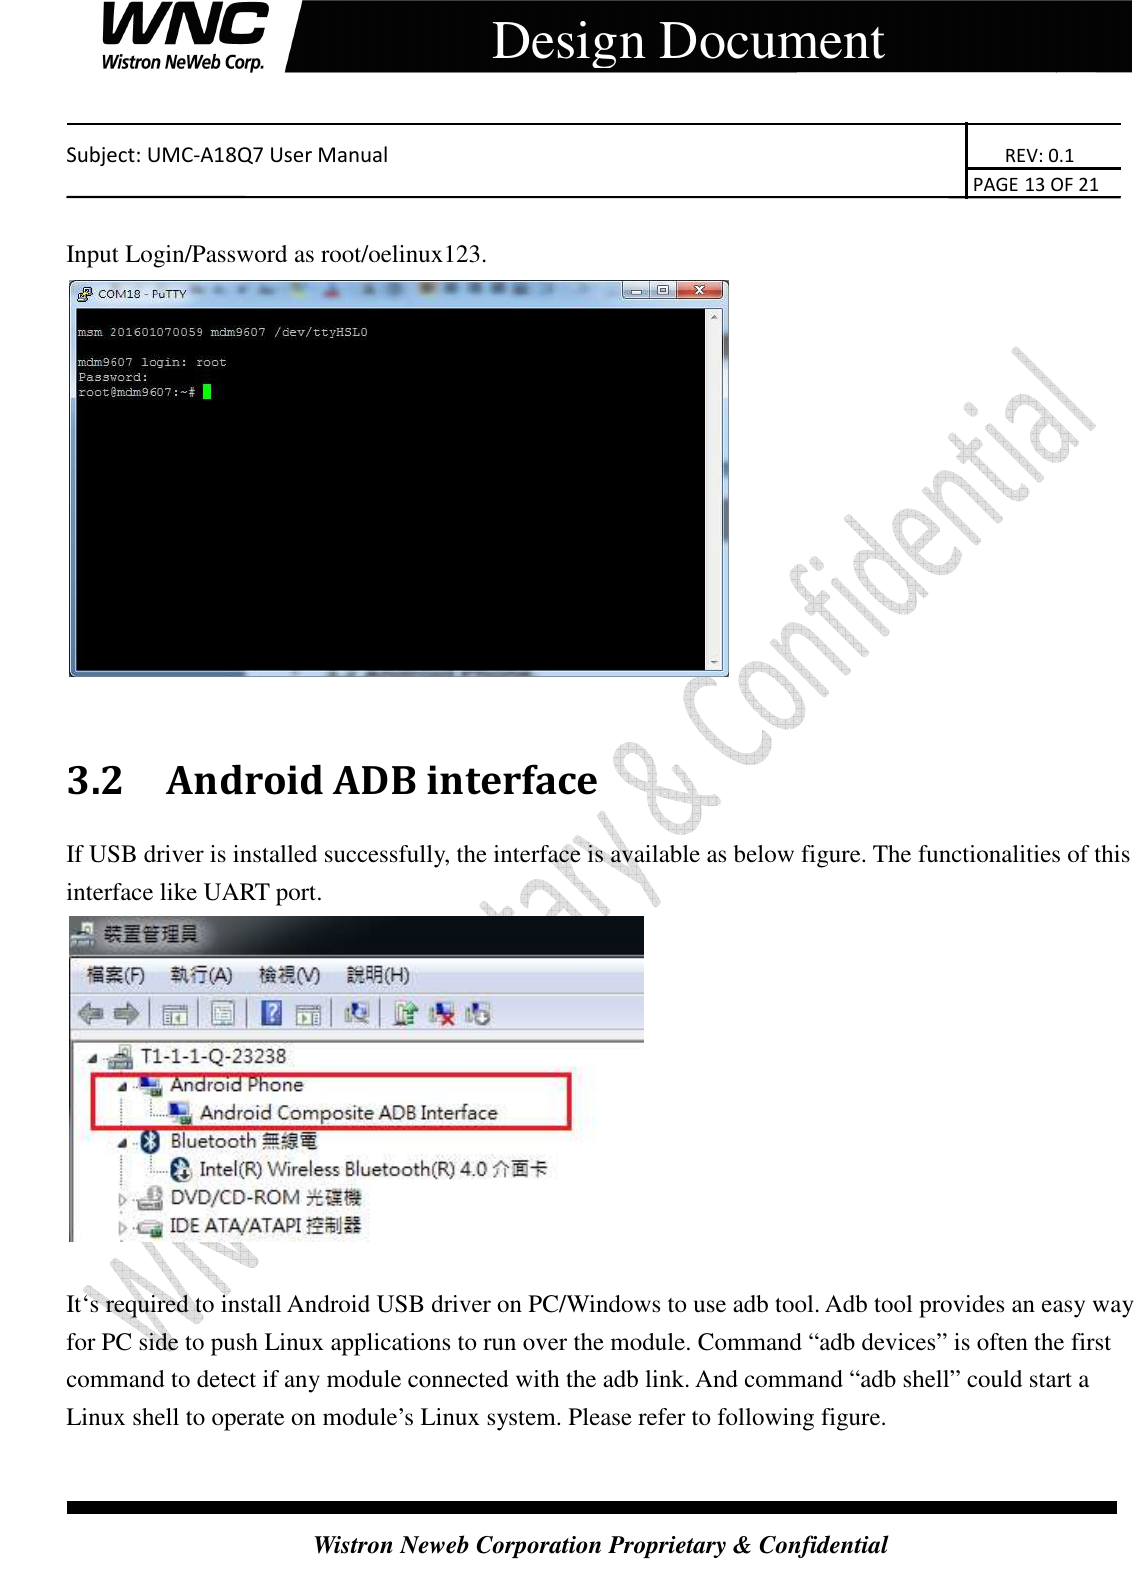    Subject: UMC-A18Q7 User Manual                                                                       REV: 0.1                                                                                                                                                                               PAGE 13 OF 21  Wistron Neweb Corporation Proprietary &amp; Confidential     Design Document  Input Login/Password as root/oelinux123.   3.2 Android ADB interface If USB driver is installed successfully, the interface is available as below figure. The functionalities of this interface like UART port.   It‘s required to install Android USB driver on PC/Windows to use adb tool. Adb tool provides an easy way for PC side to push Linux applications to run over the module. Command “adb devices” is often the first command to detect if any module connected with the adb link. And command “adb shell” could start a Linux shell to operate on module’s Linux system. Please refer to following figure.  